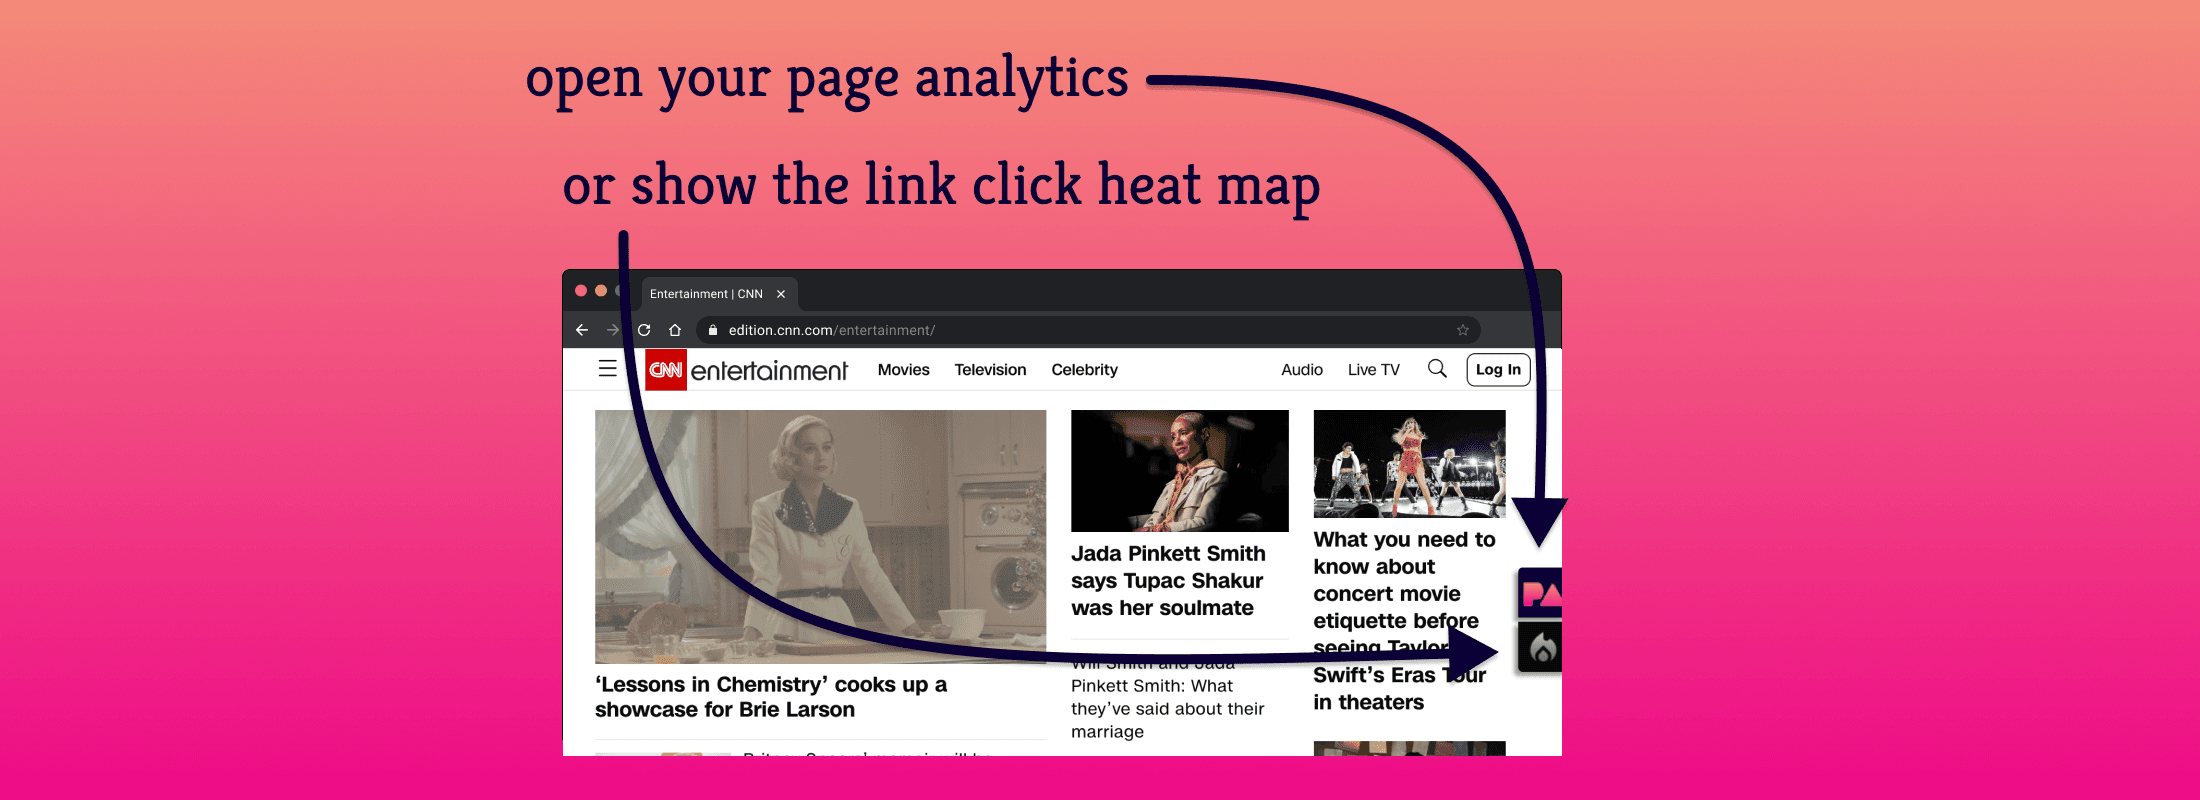 Open your page analytics or show the click heat map